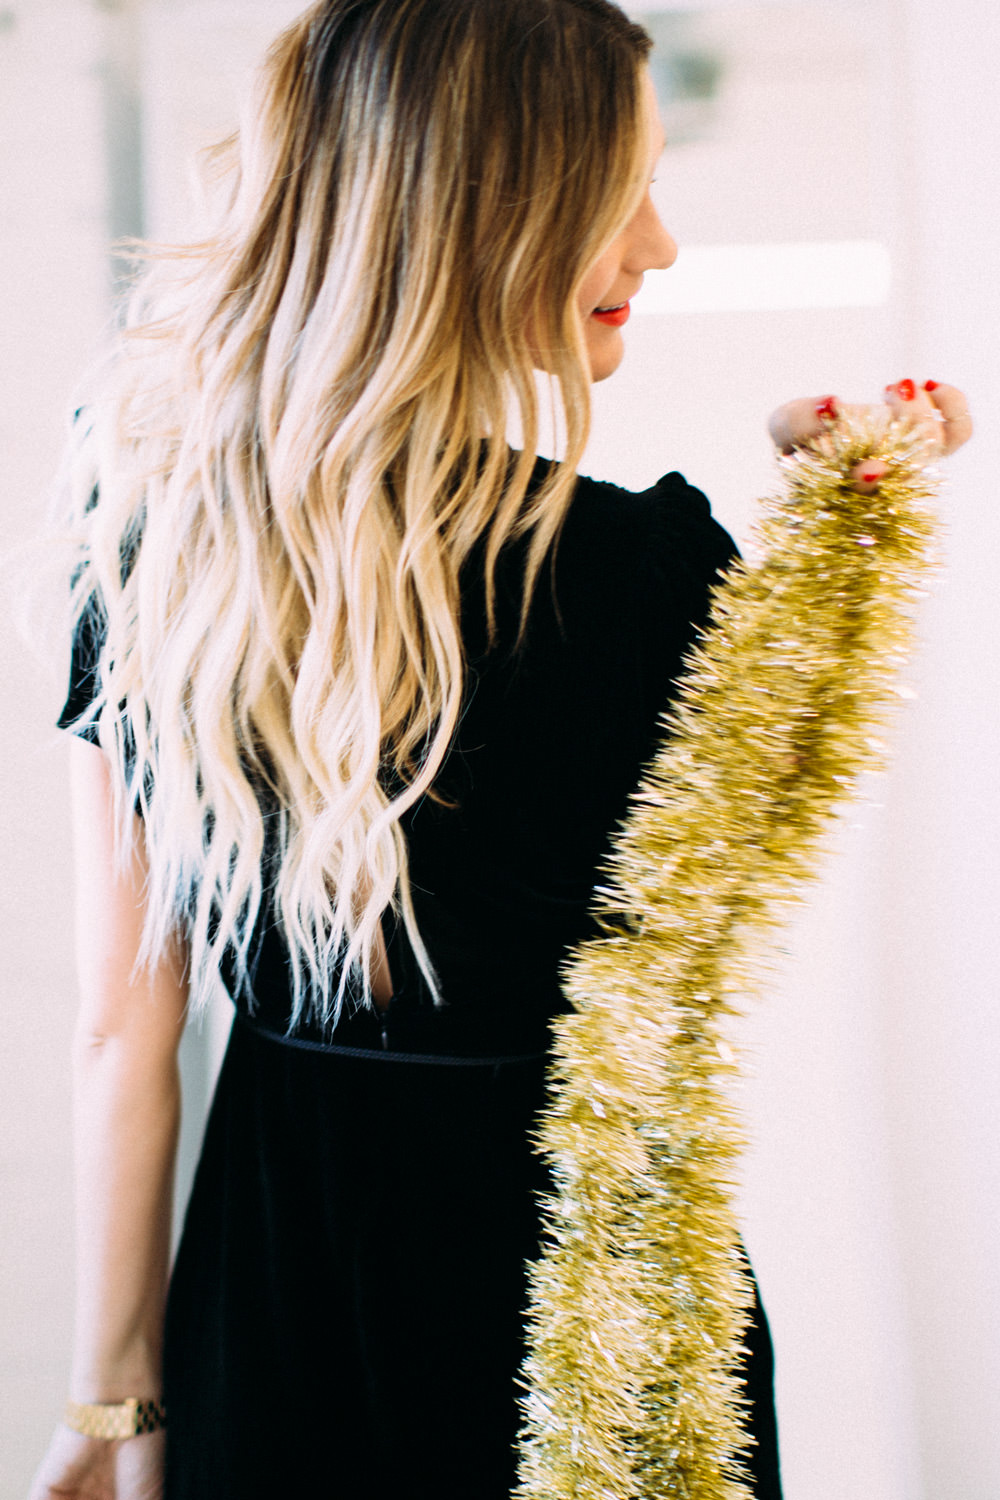 Dash of Darling shares six unexpected holiday party ideas that aren't your average ugly sweater party with Express.